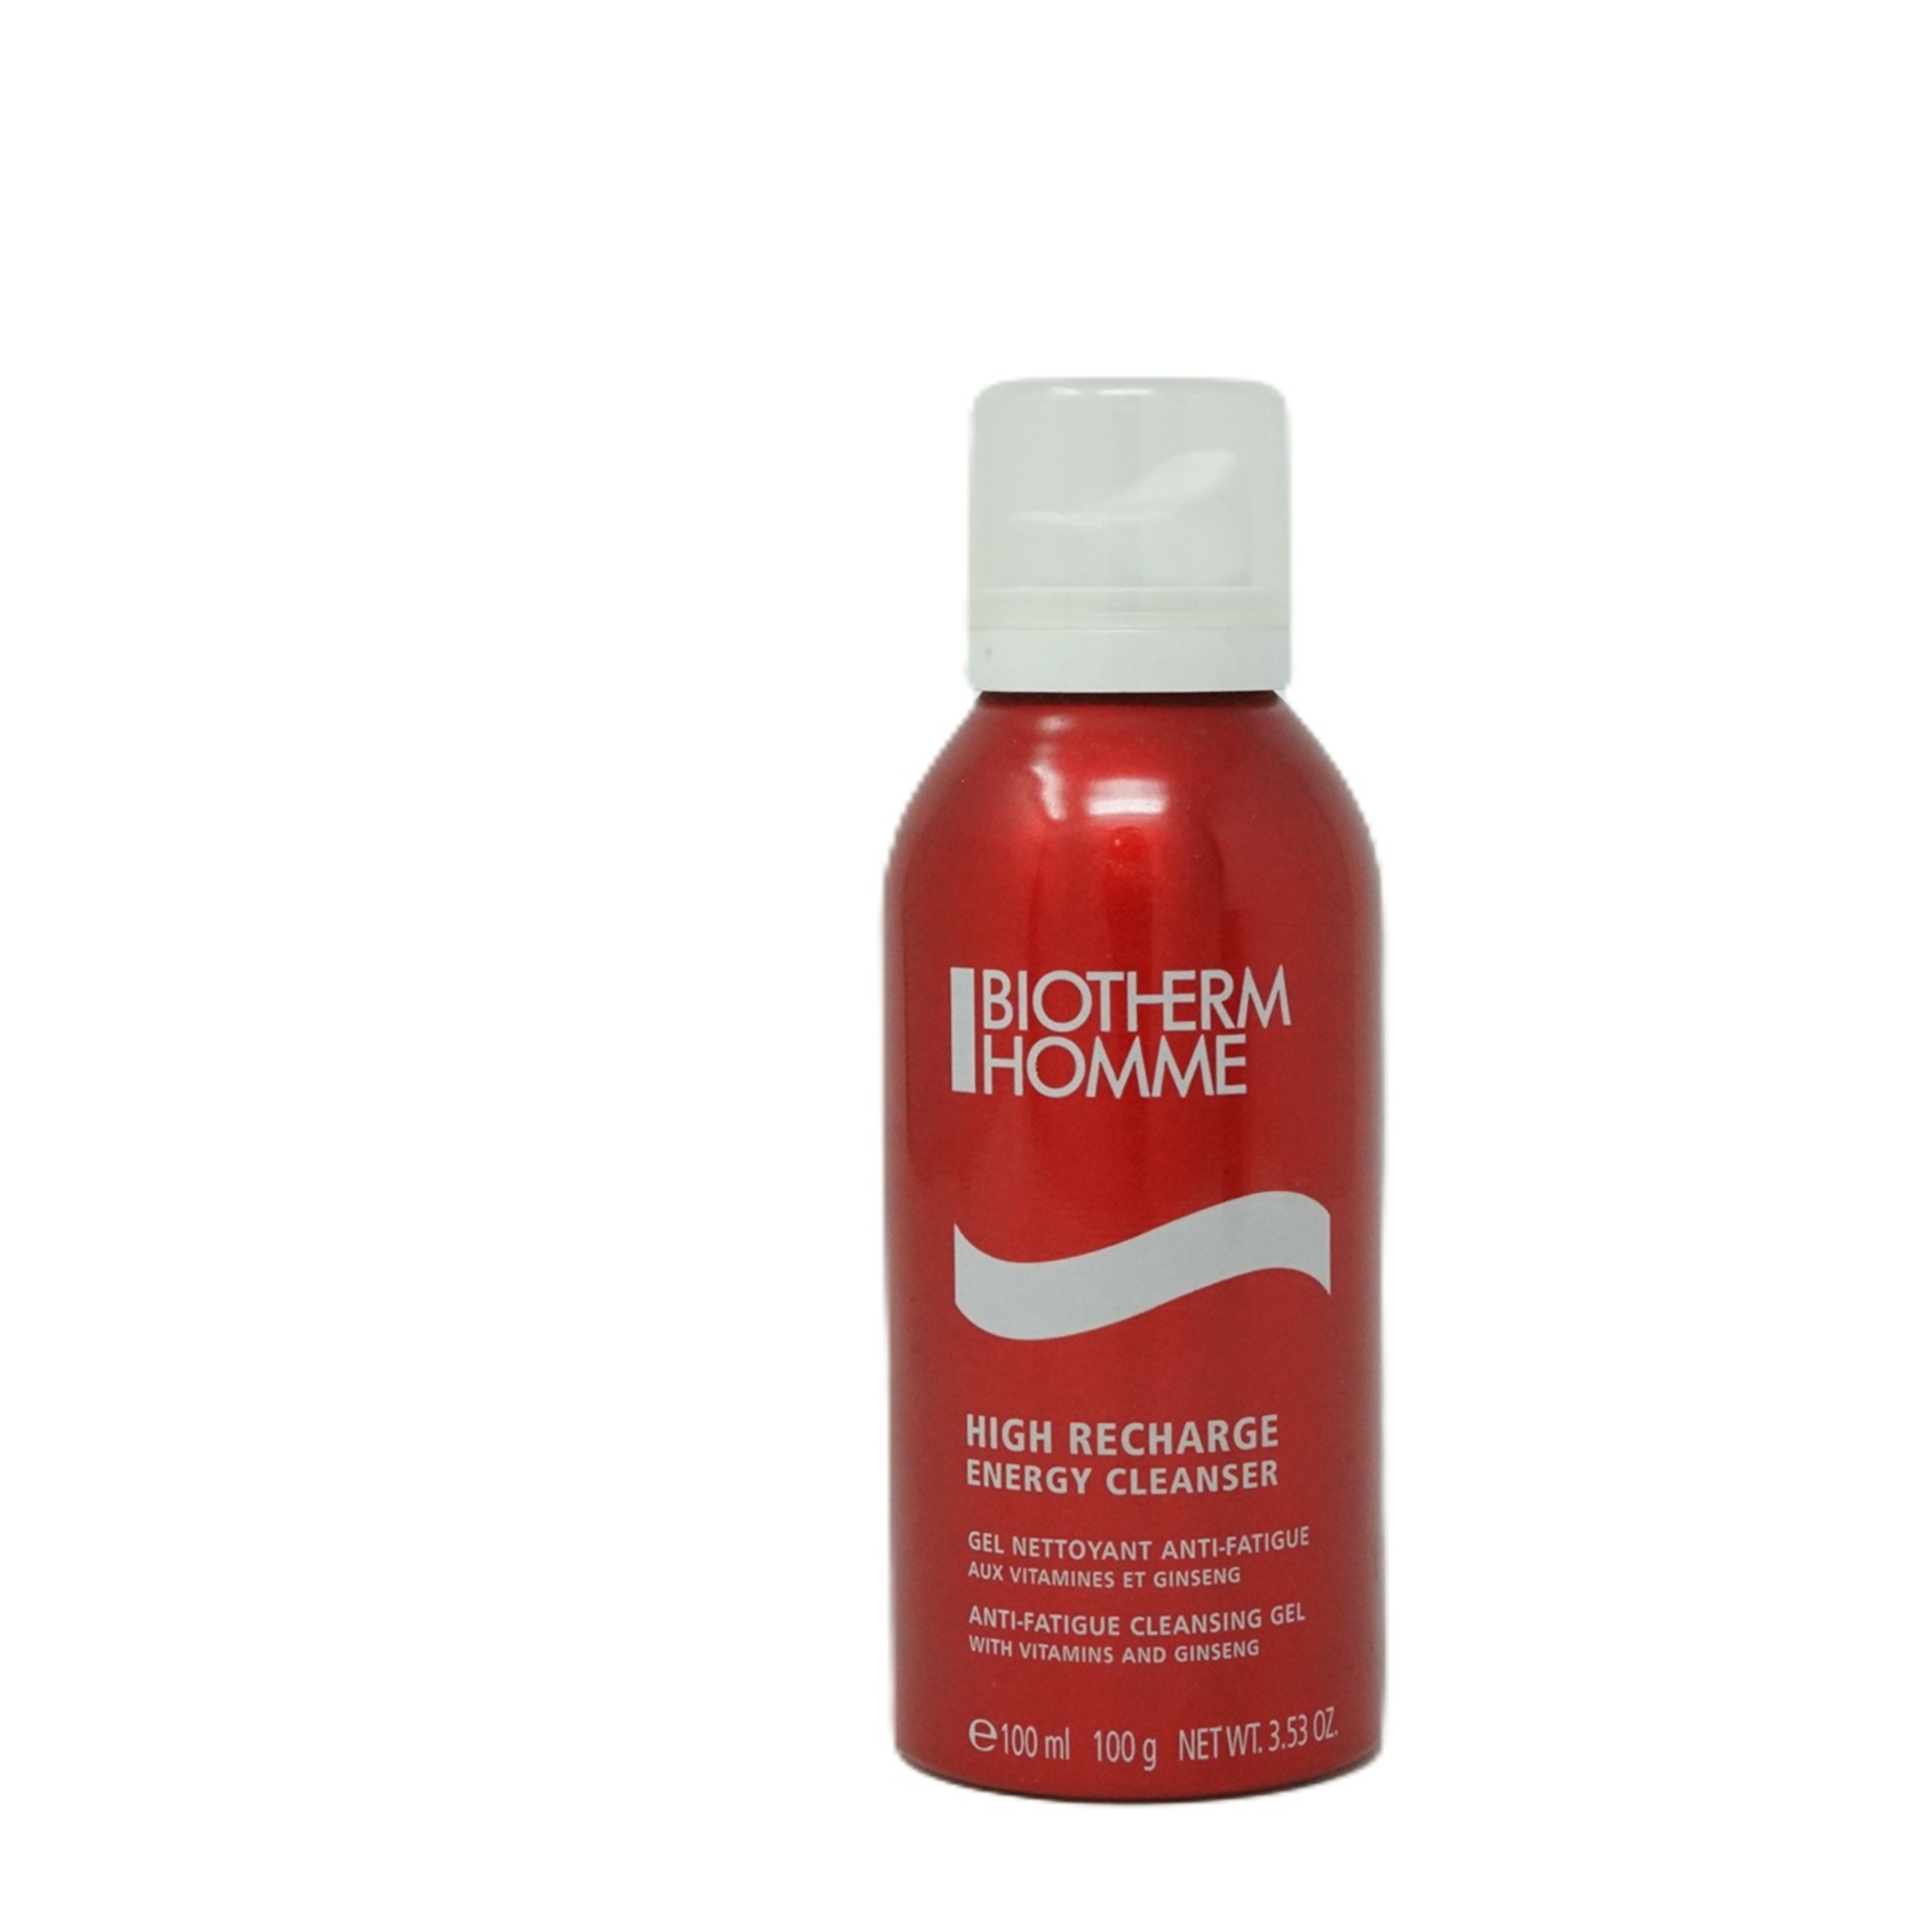 Biotherm Homme High Recharge Cleansing Gel 100ml